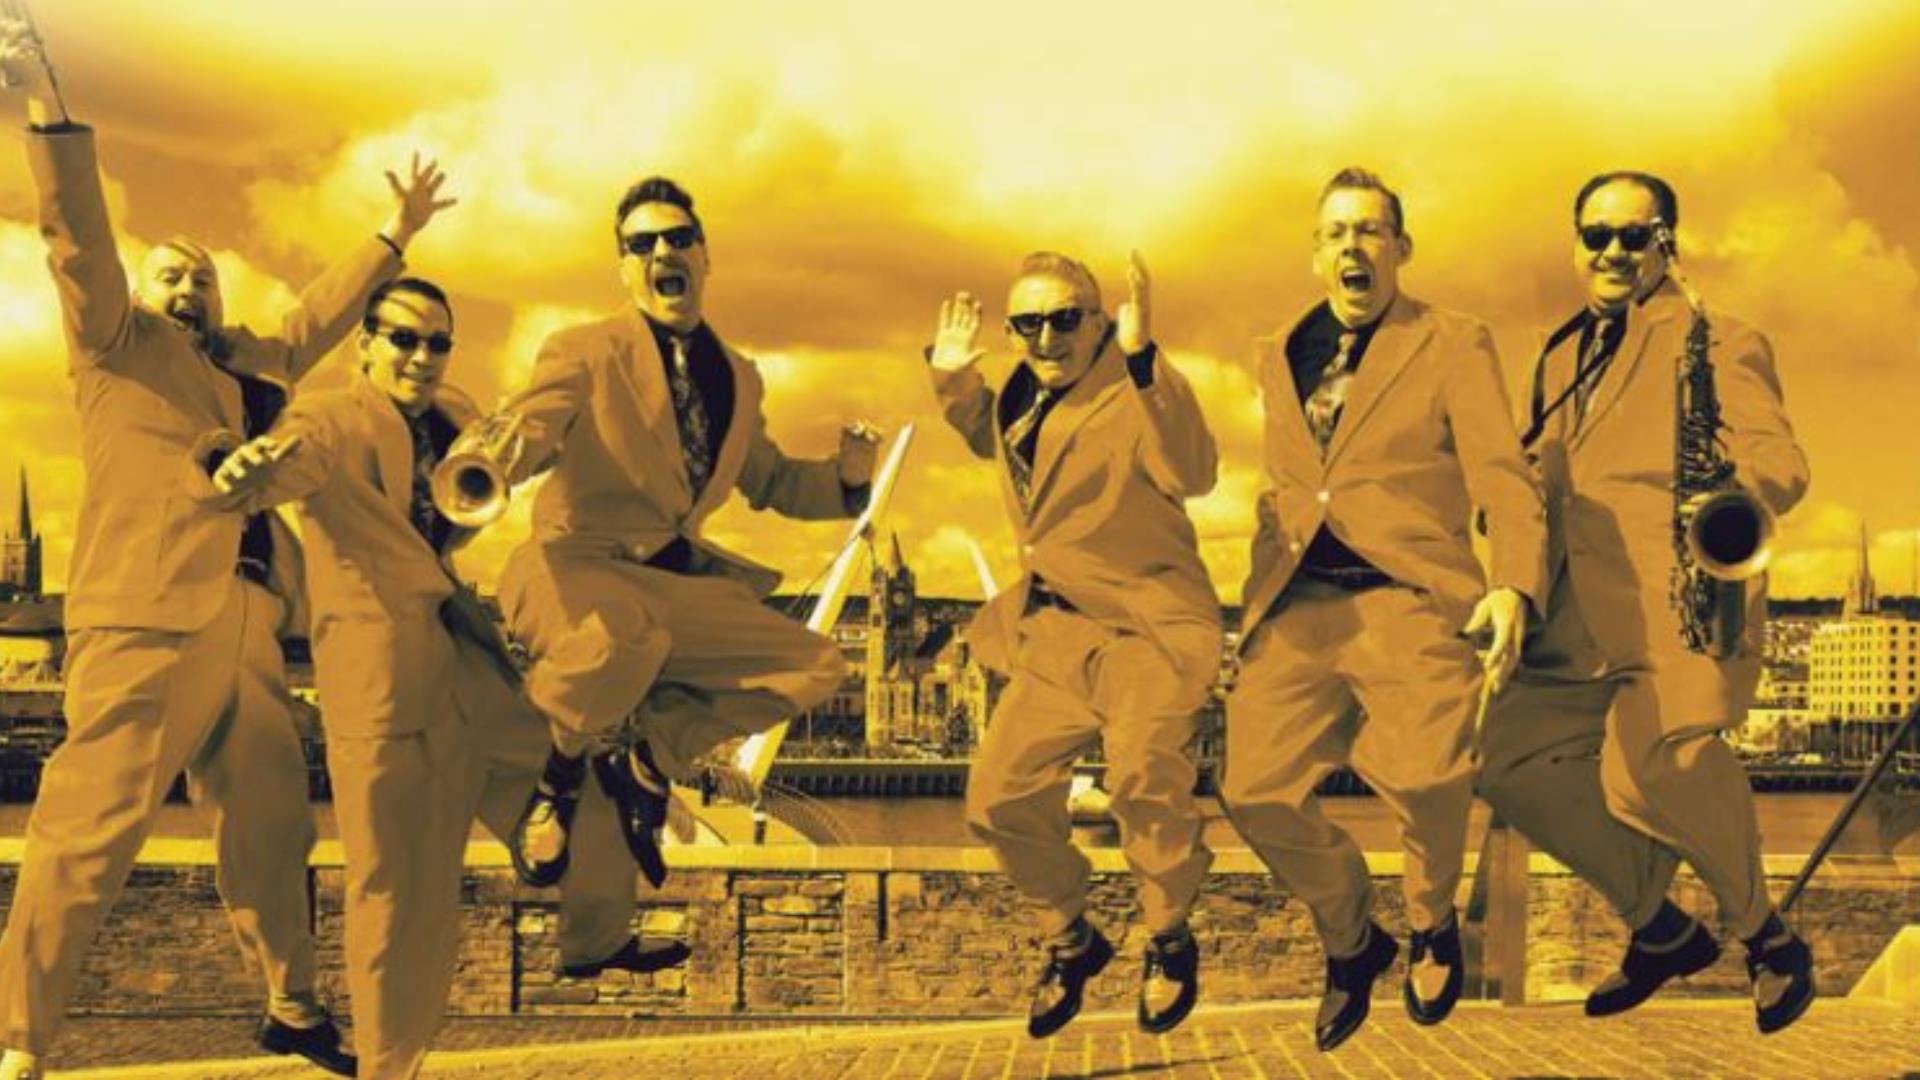 The 'Jive Aces' at Ebrington Square in Derry-Londonderry